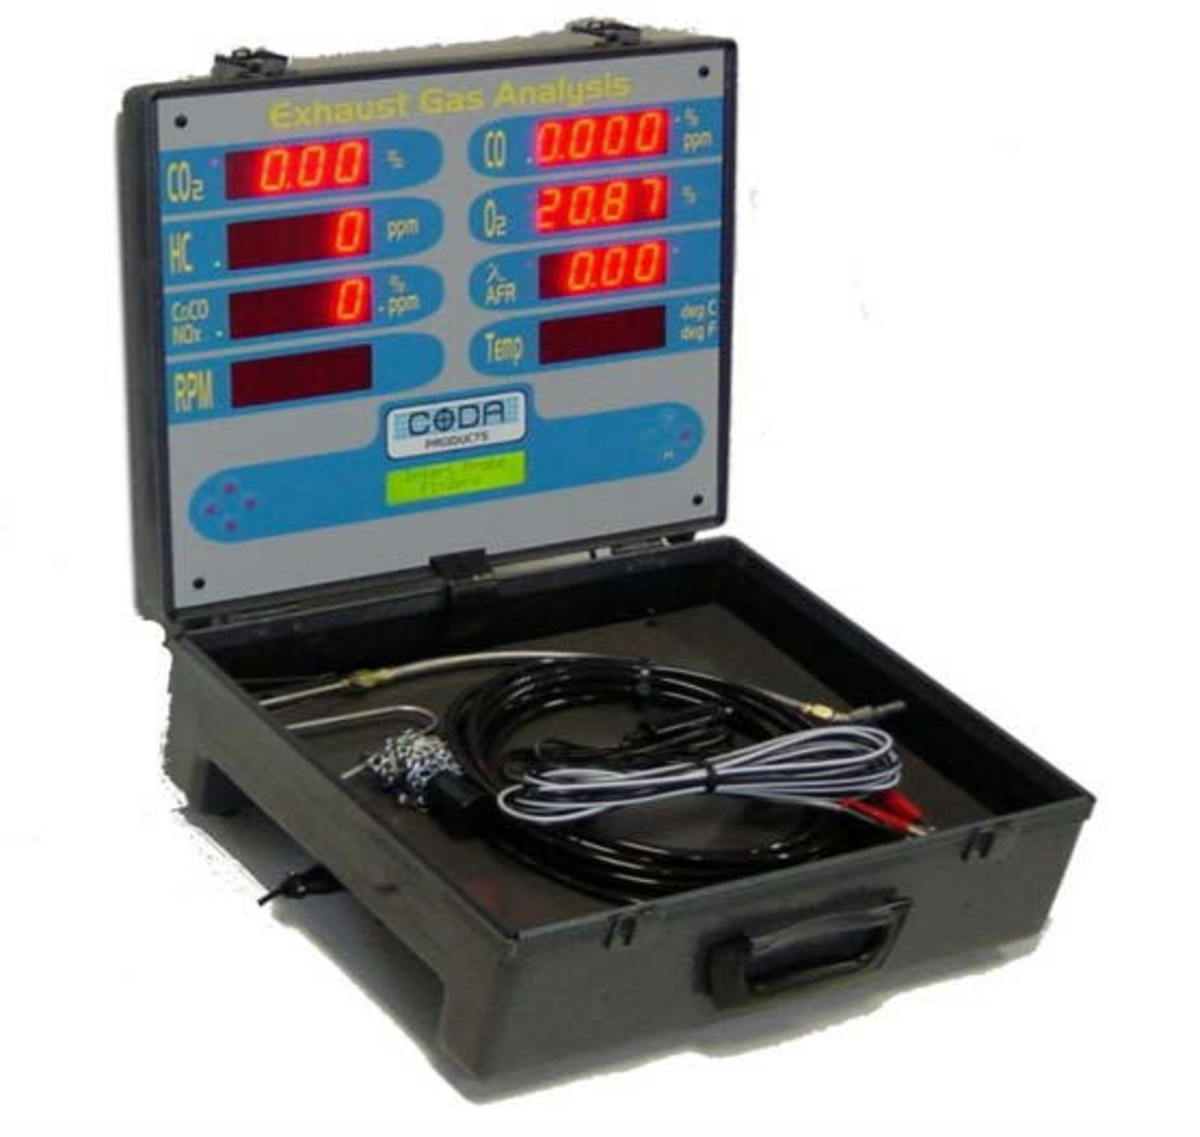 This is a modern portable 5 gas analyzer.